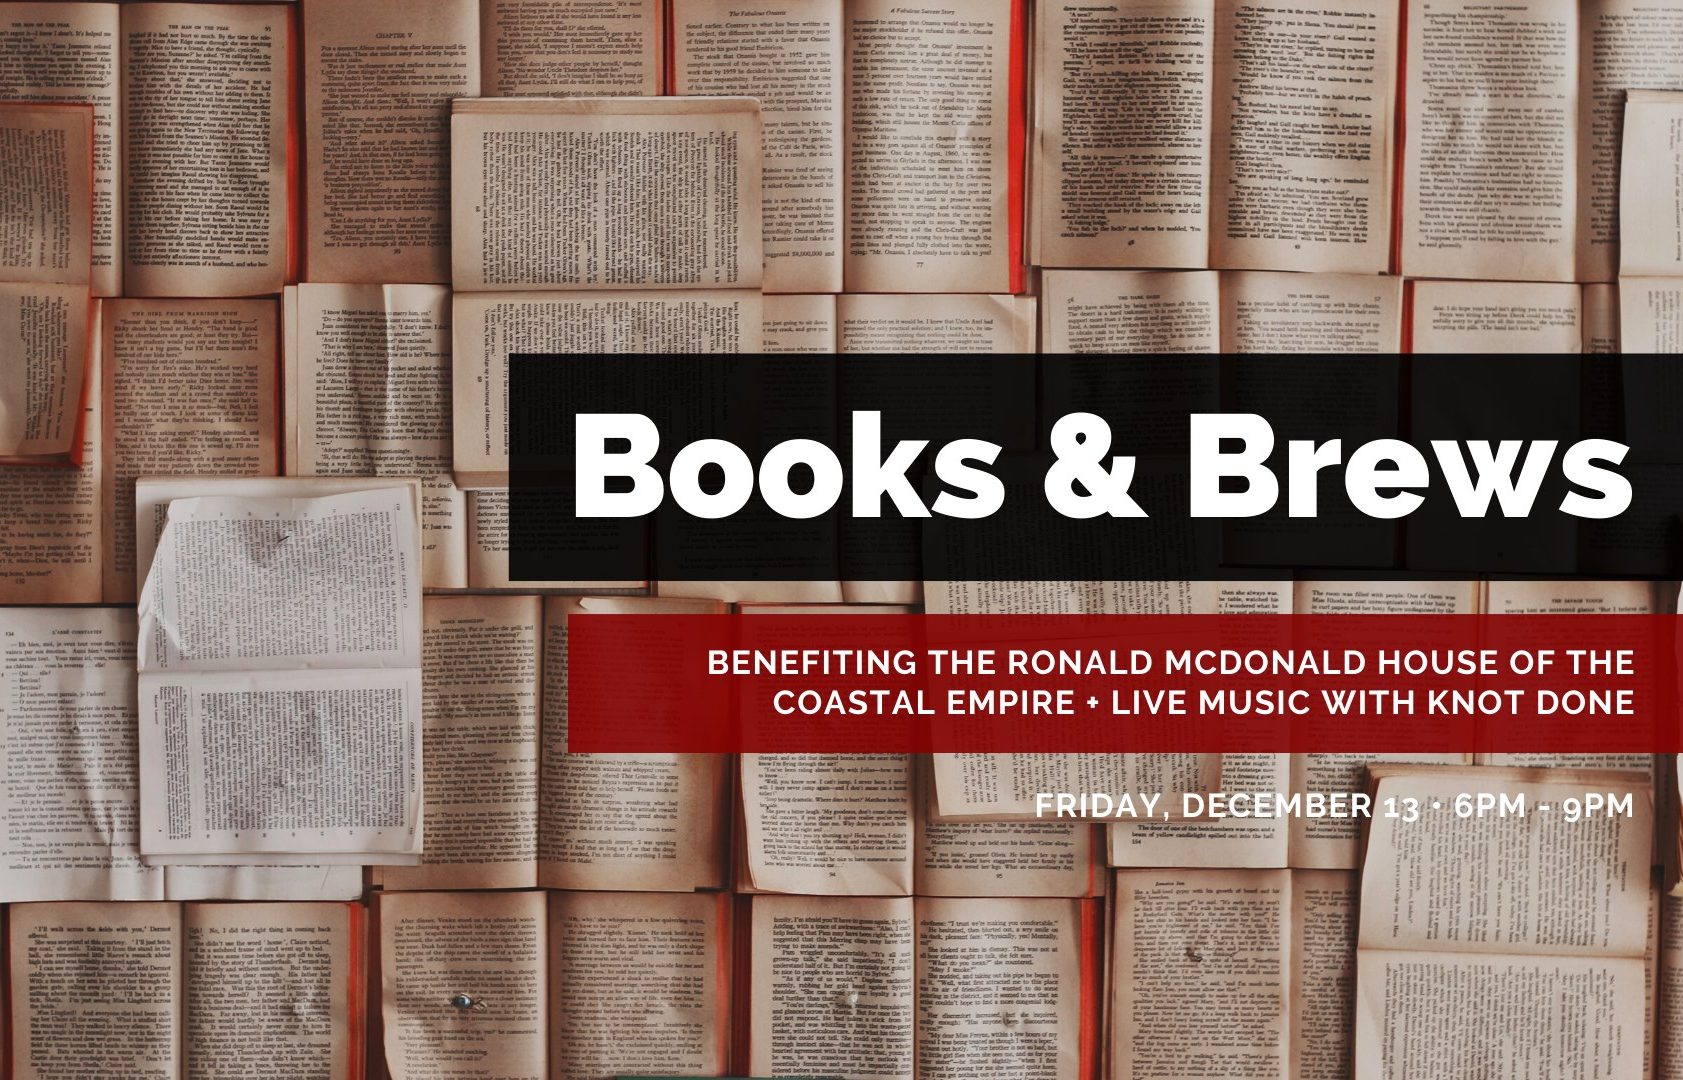 Books and Brews event at Southbound Brewing Co., Dec. 13, 6-9 p.m.